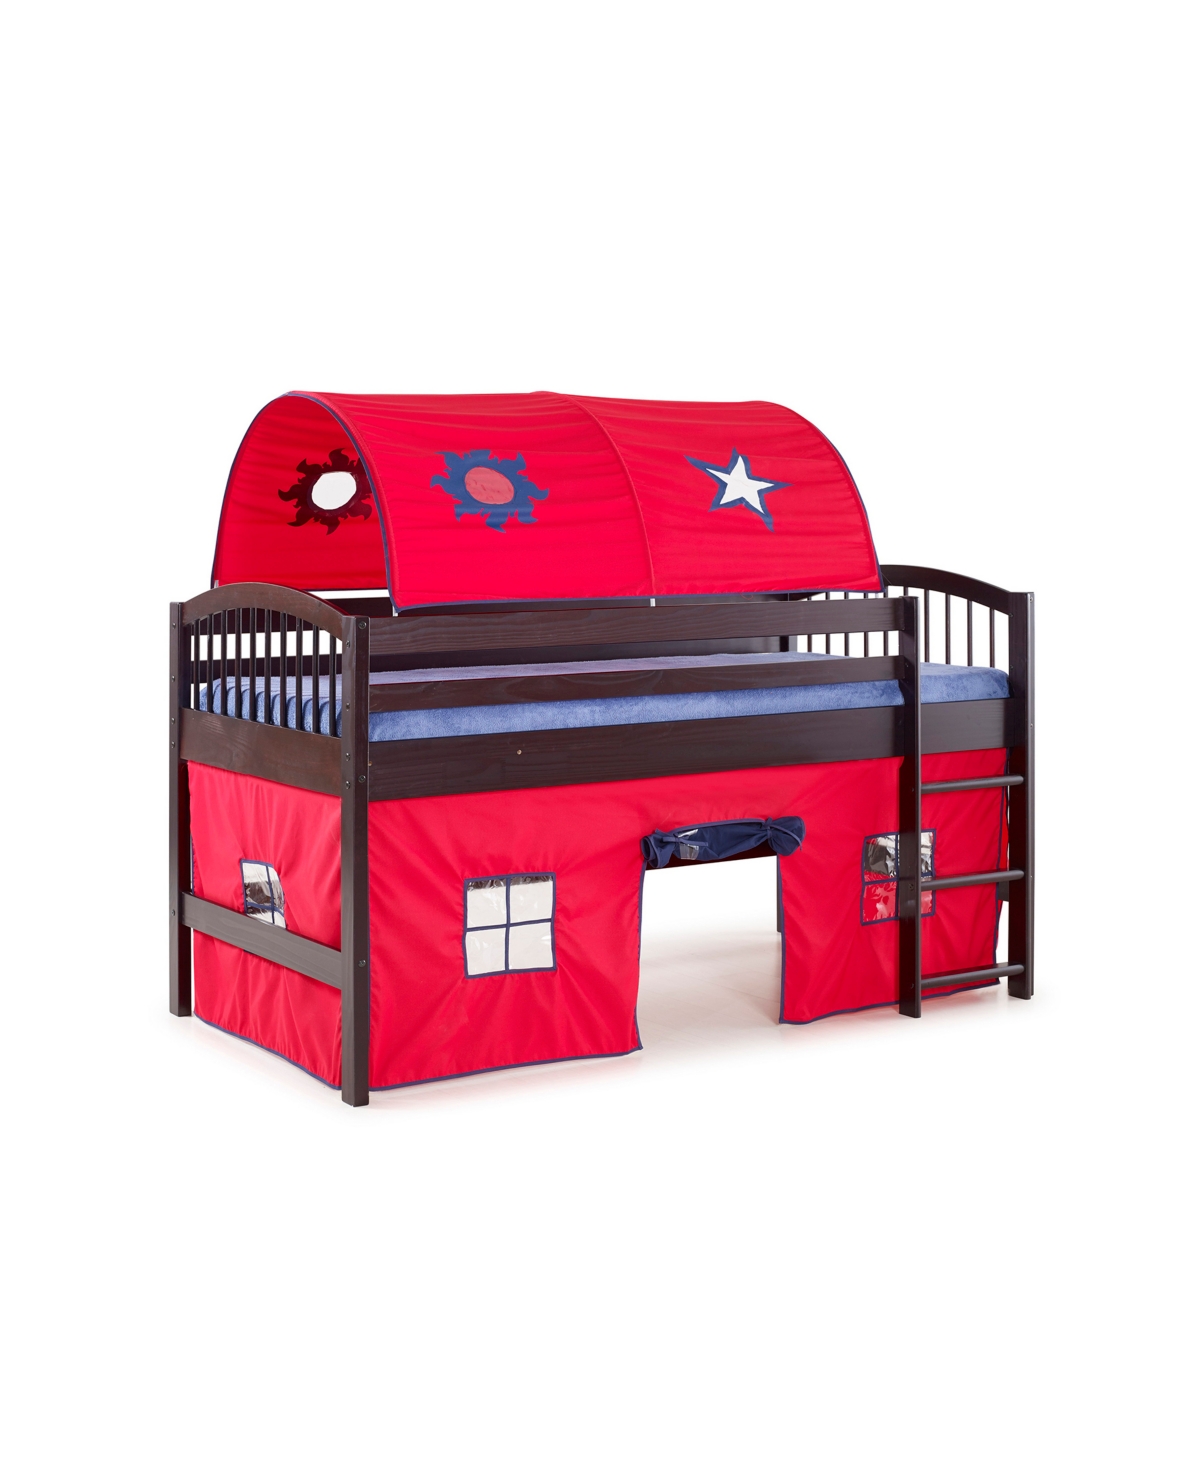 ALATERRE FURNITURE ADDISON ESPRESSO FINISH JUNIOR LOFT BED, TENT AND A PLAYHOUSE WITH TRIM